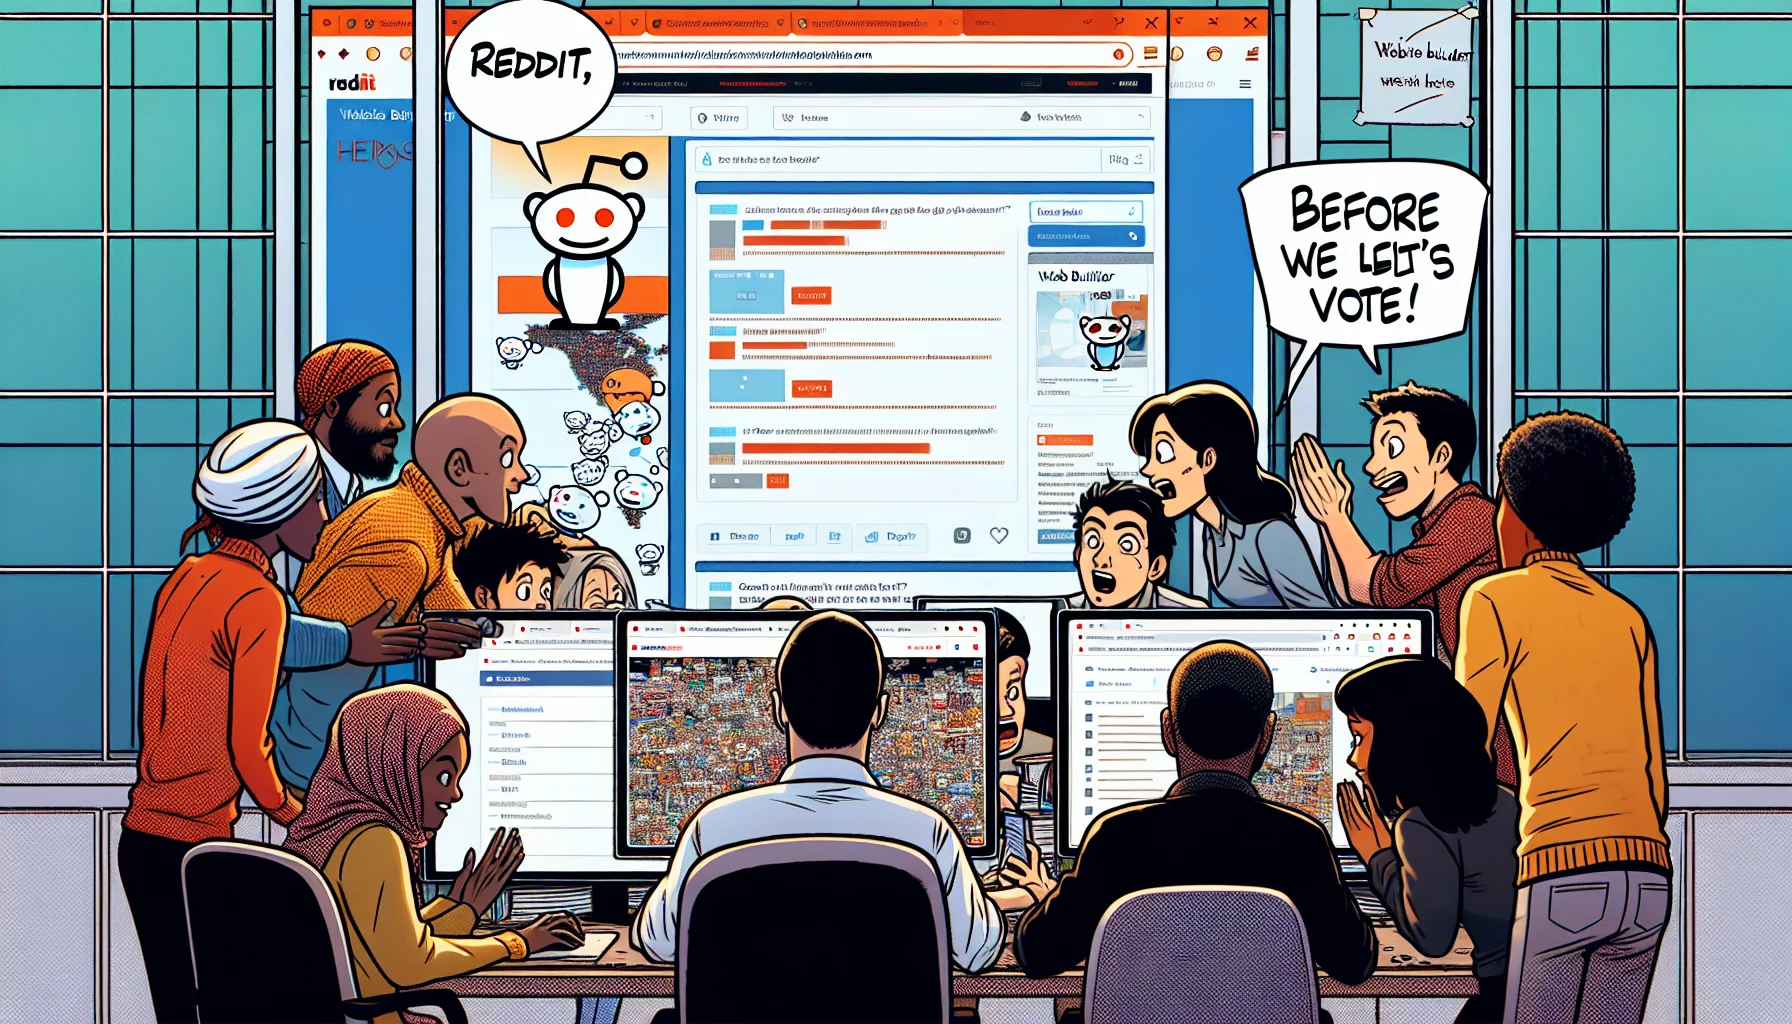 Imagine a comic scene in a busy office setting. A group of characters representing a variety of racial backgrounds, including South Asian, Caucasian, and Black individuals, are huddled around a computer monitor. On the screen, a web page is visible, denoted with a large, noticeable 'Reddit' logo. There are also numerous tabs open showing various website builder tools, indicating their ongoing pursuit of the 'best website builder'. A speech bubble from one of the characters reads, 'Before we host, let's vote!' This evokes playful competition while emphasizing the collaborative nature of web hosting.